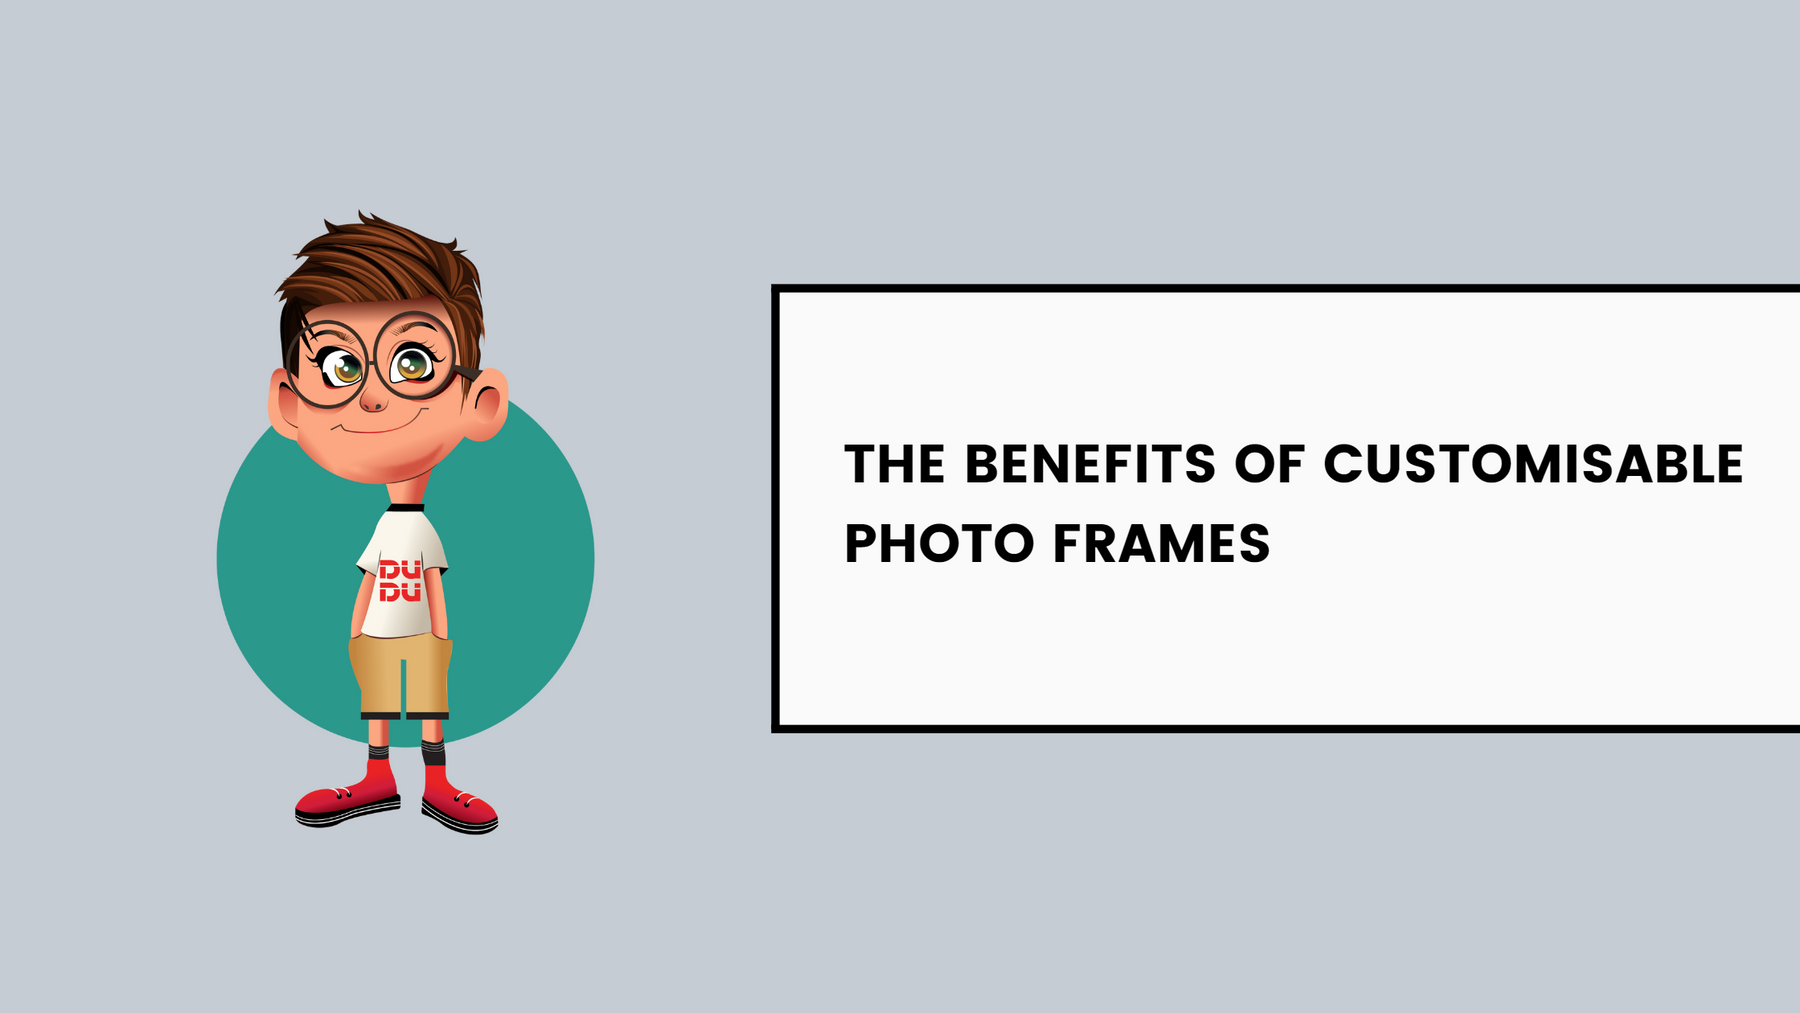 The Benefits of Customisable Photo Frames